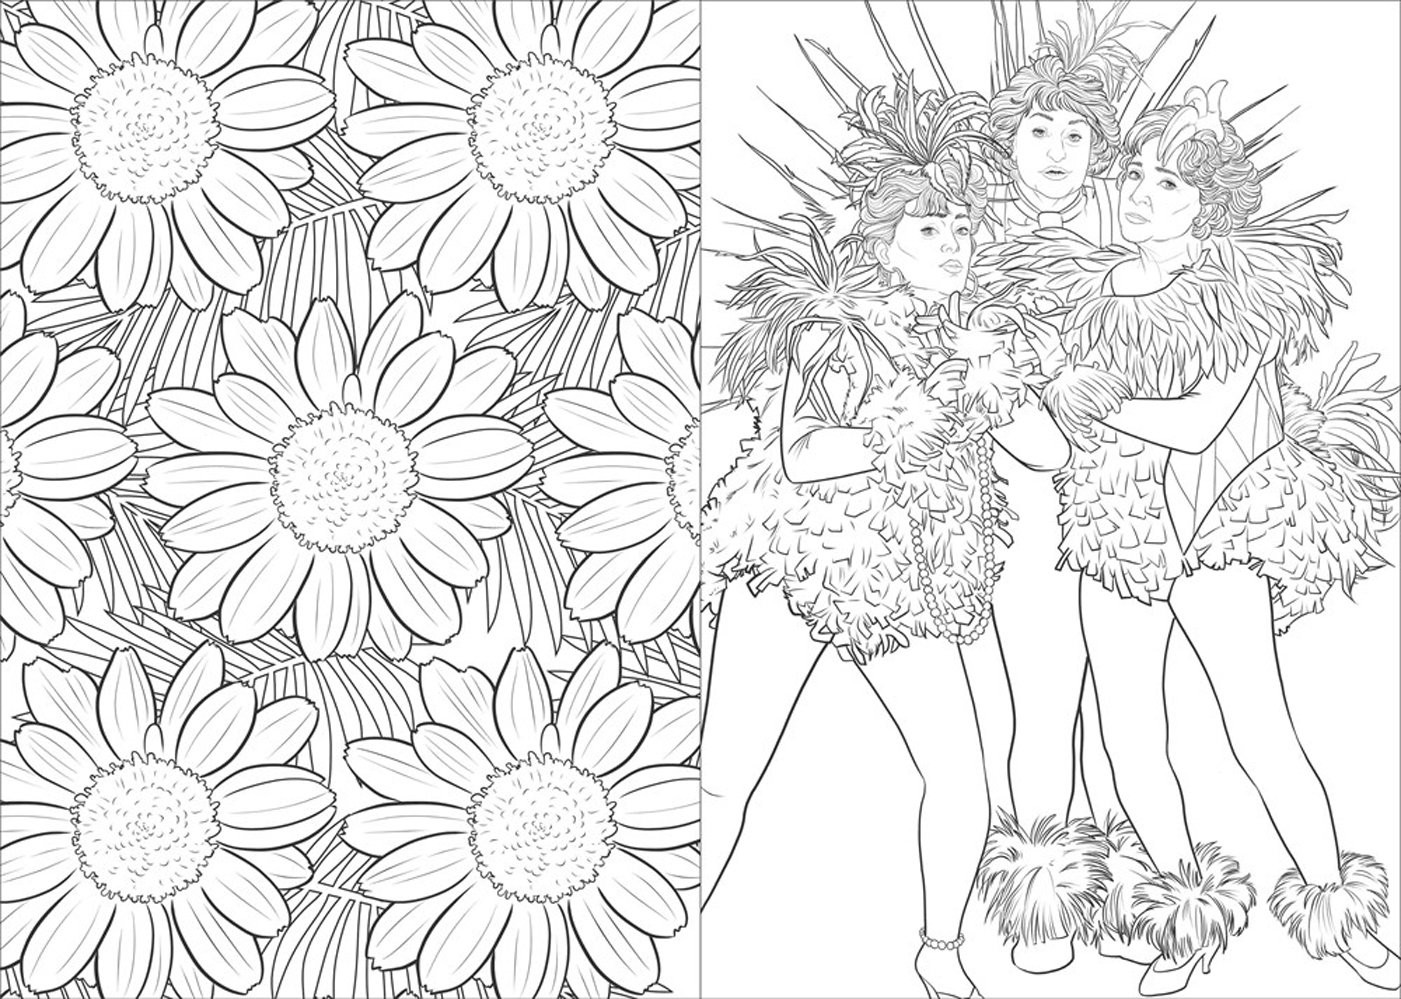 The Golden Girls Coloring Book
 The Golden Girls Now in Coloring Book Form